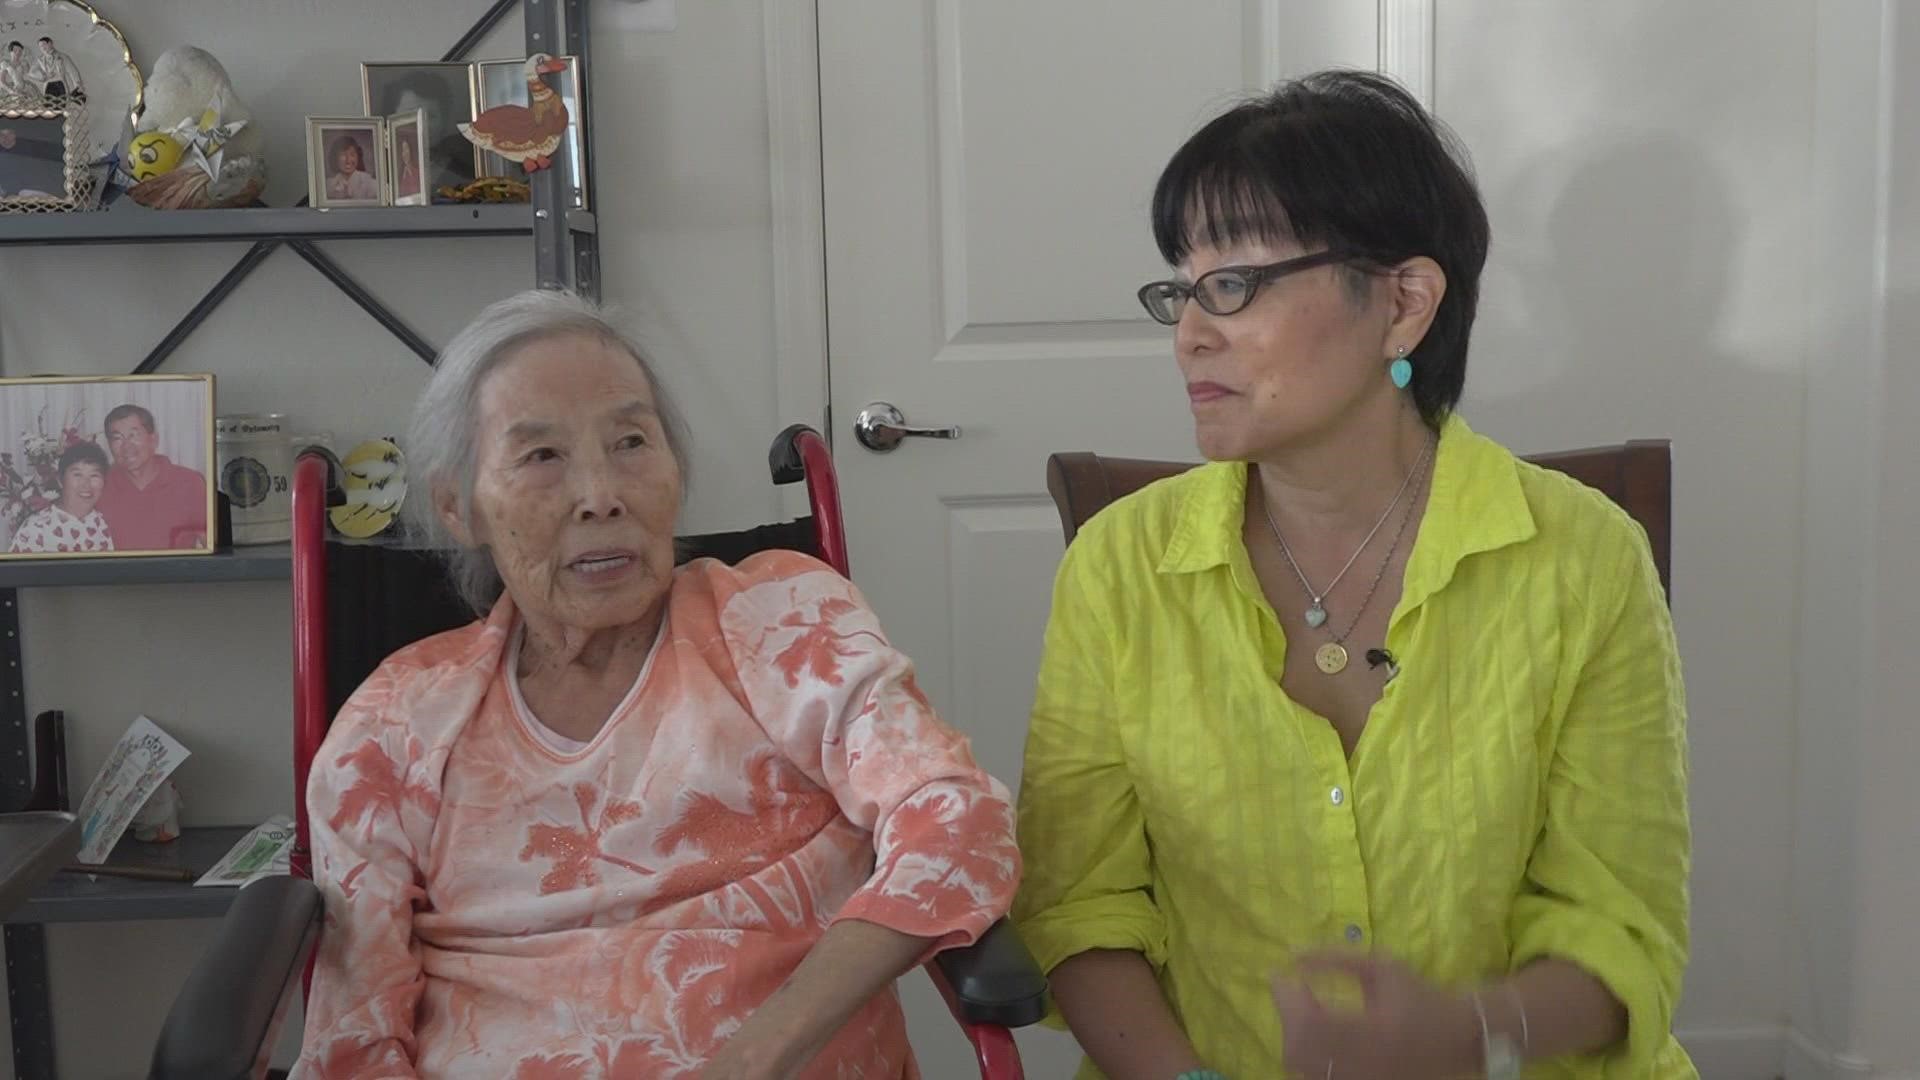 On April 30, Social Security mistakenly declared Mary Tsukamoto dead. The issue is, that she is still very much alive.